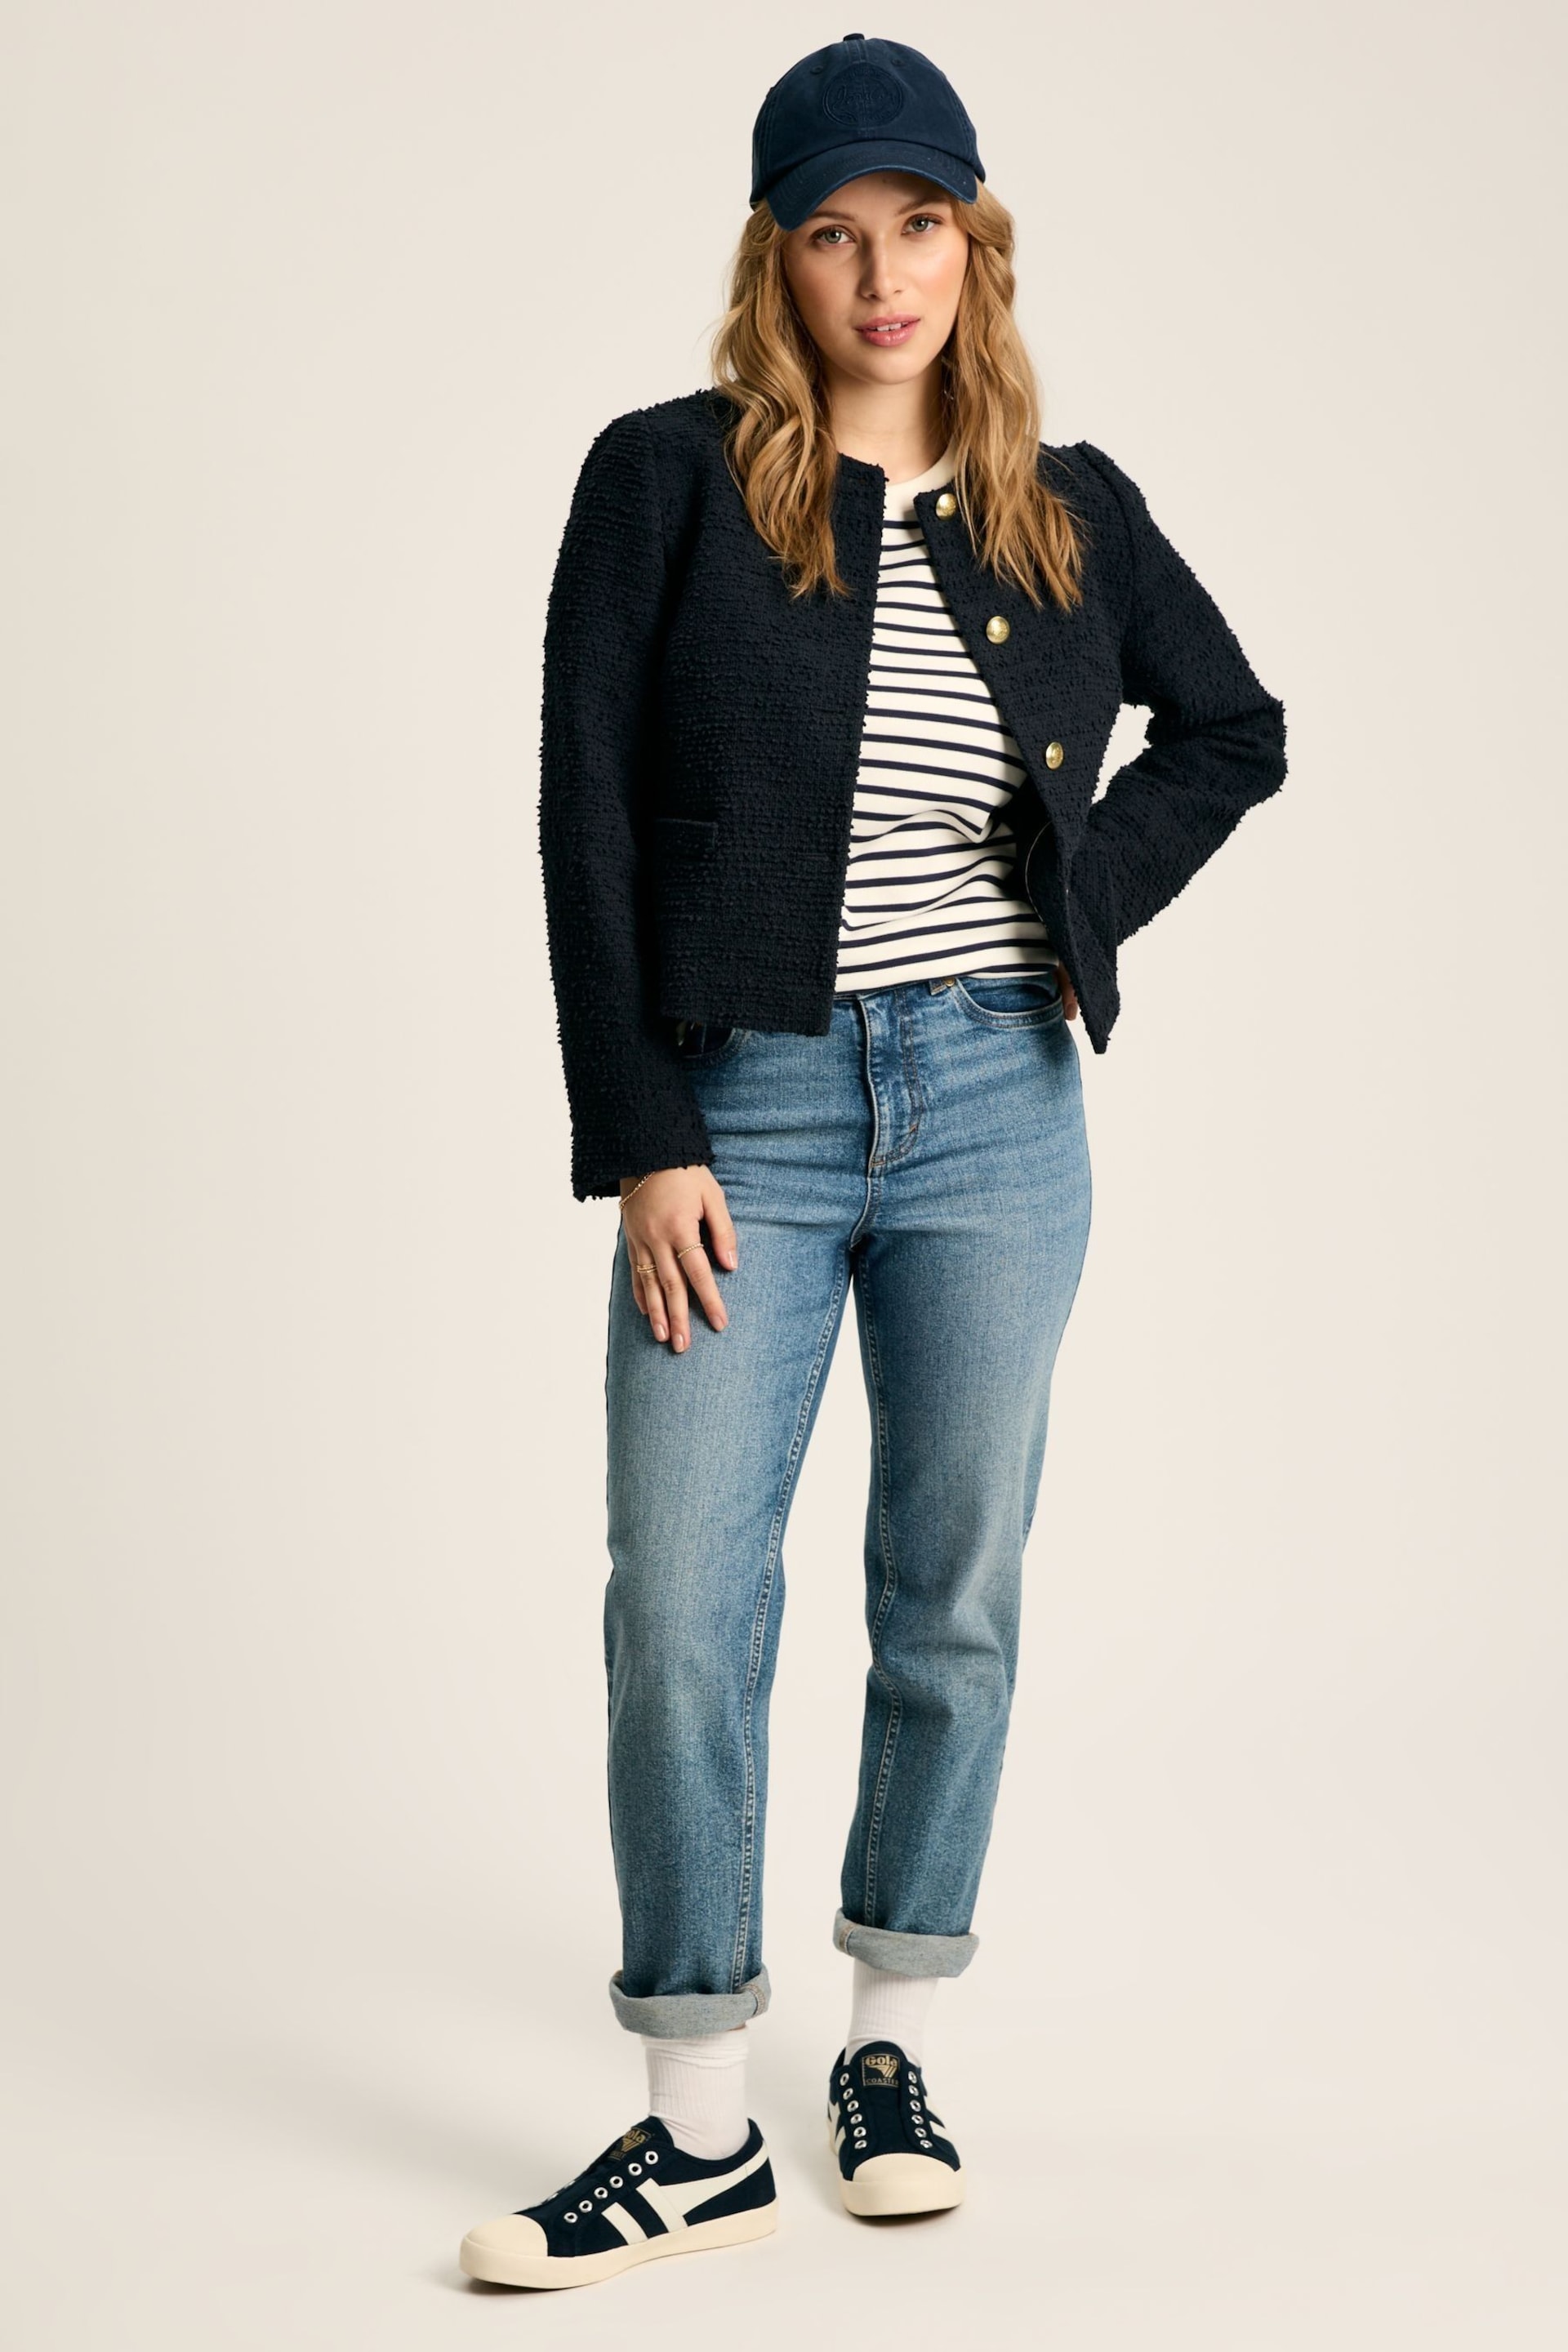 Joules Hampstead Navy Boucle Jacket - Image 5 of 6